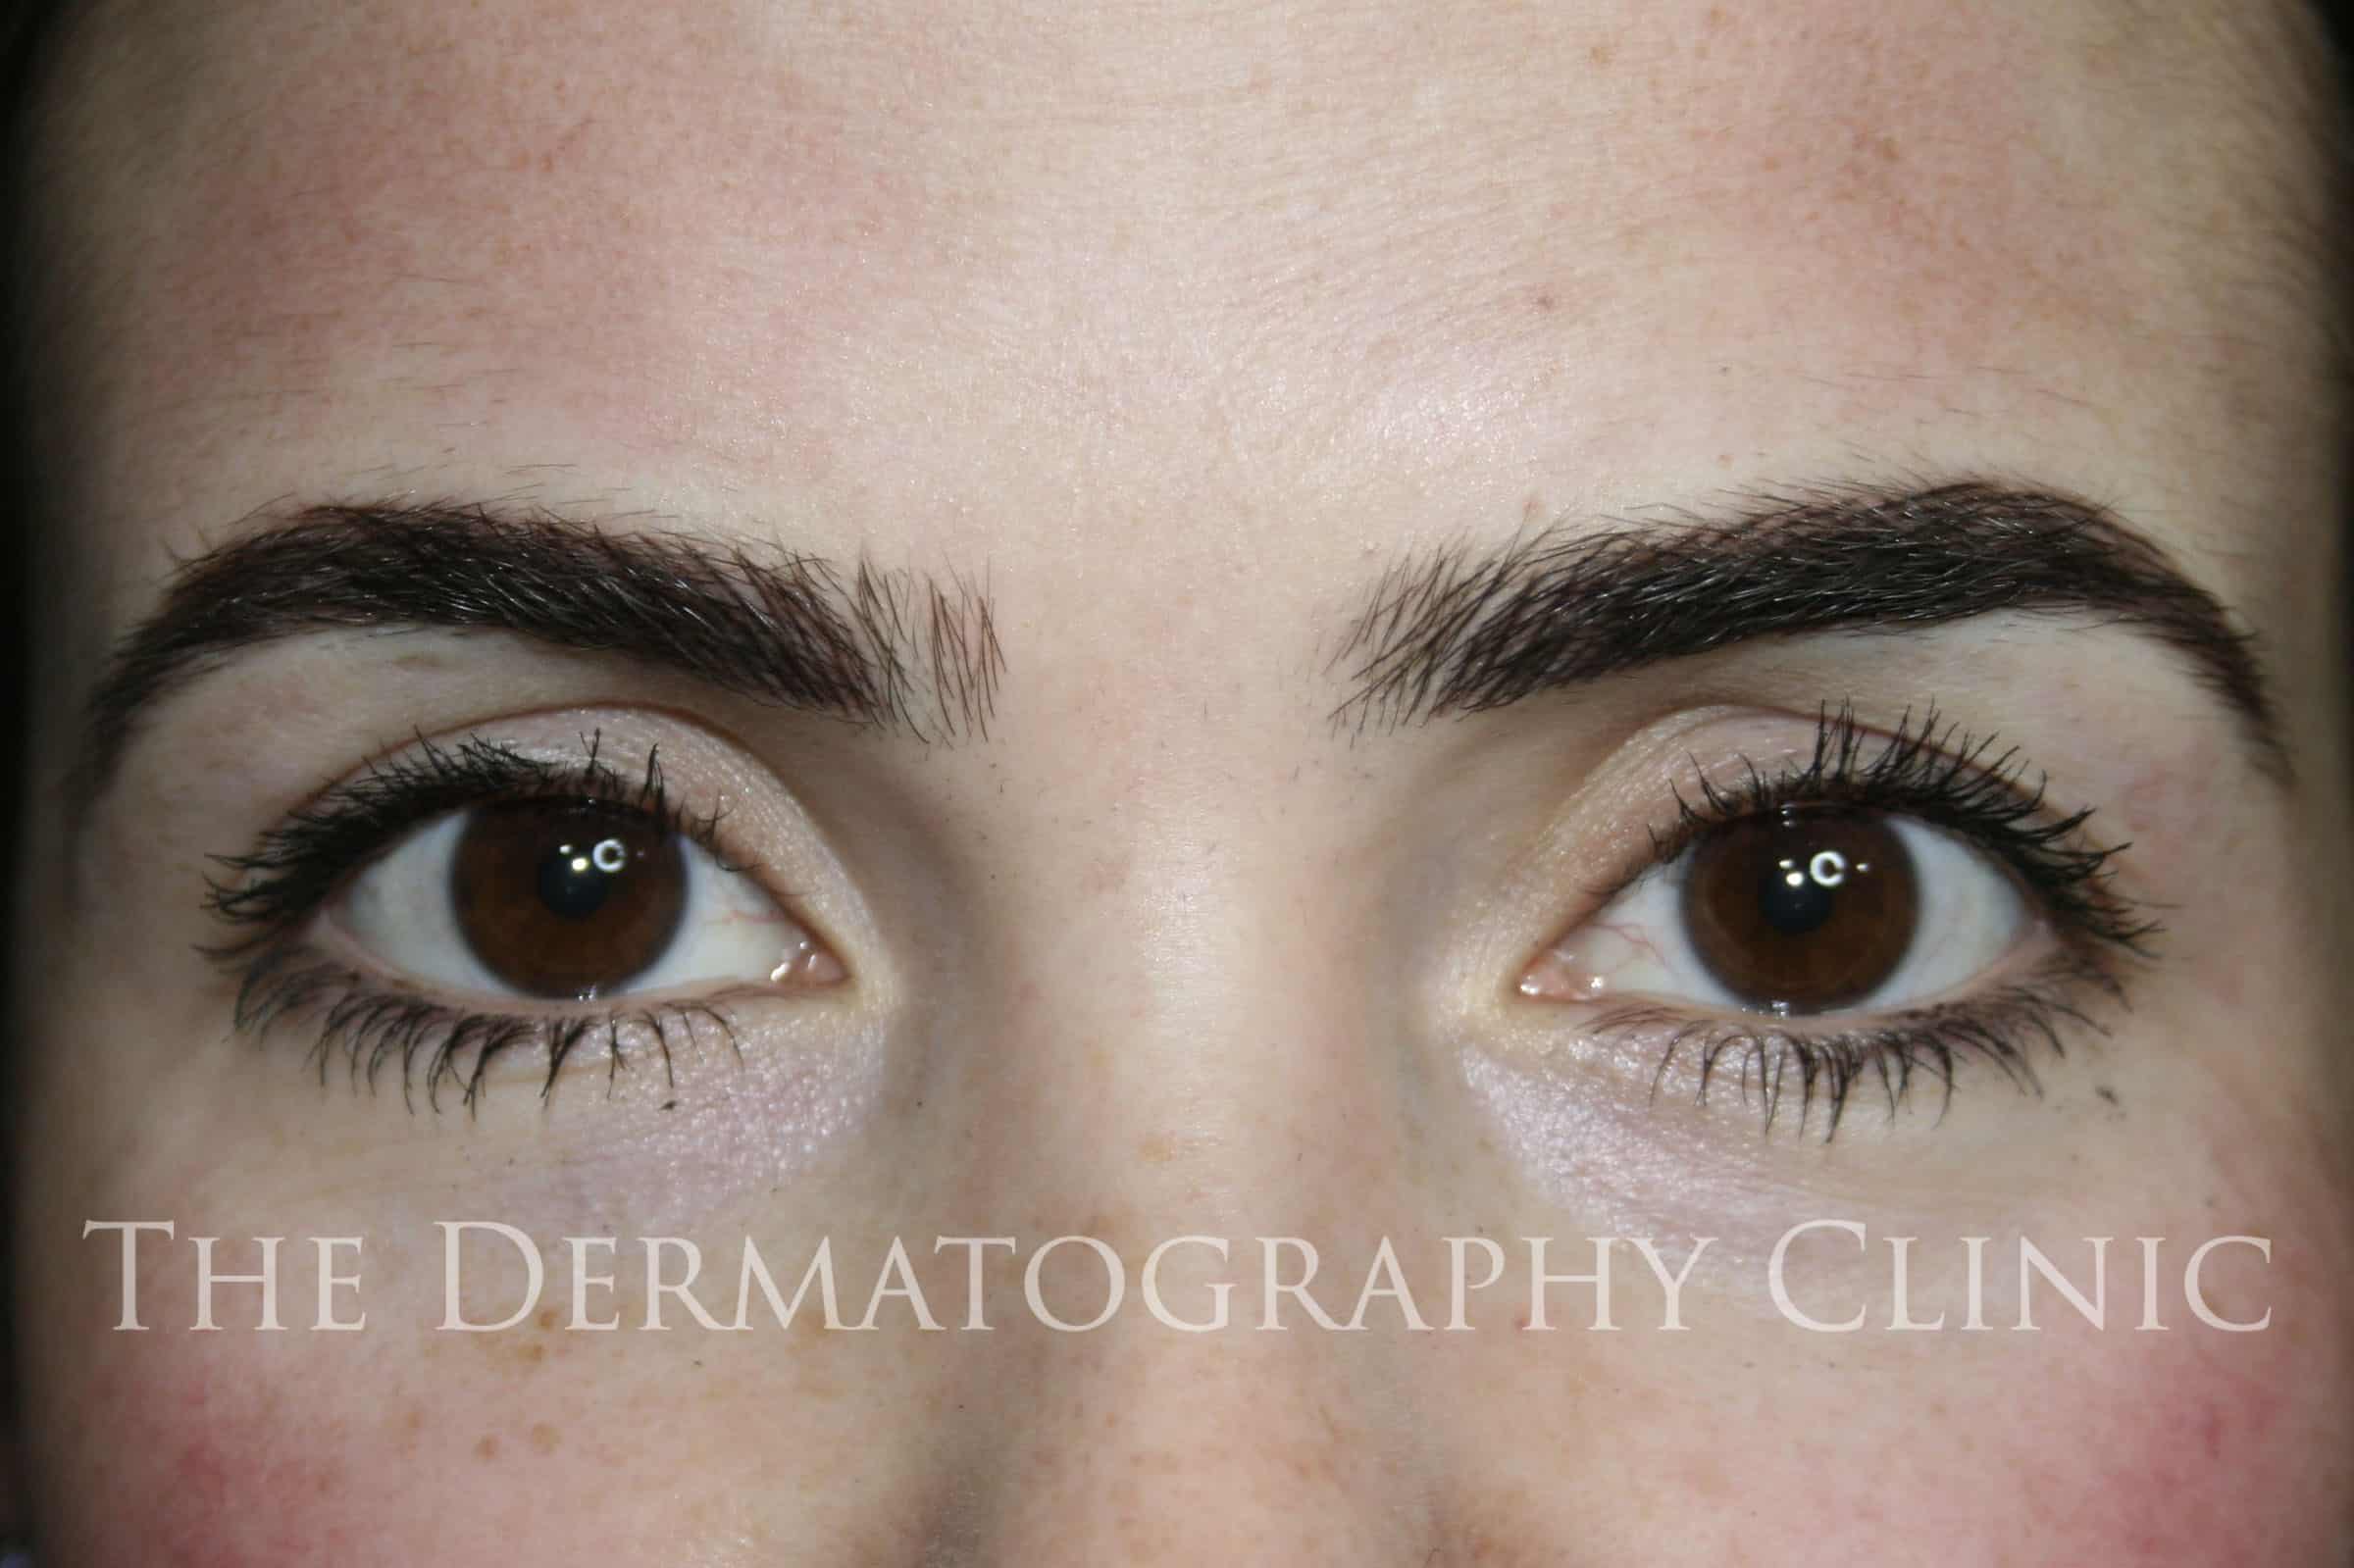 Erica Permanent Eyebrows After